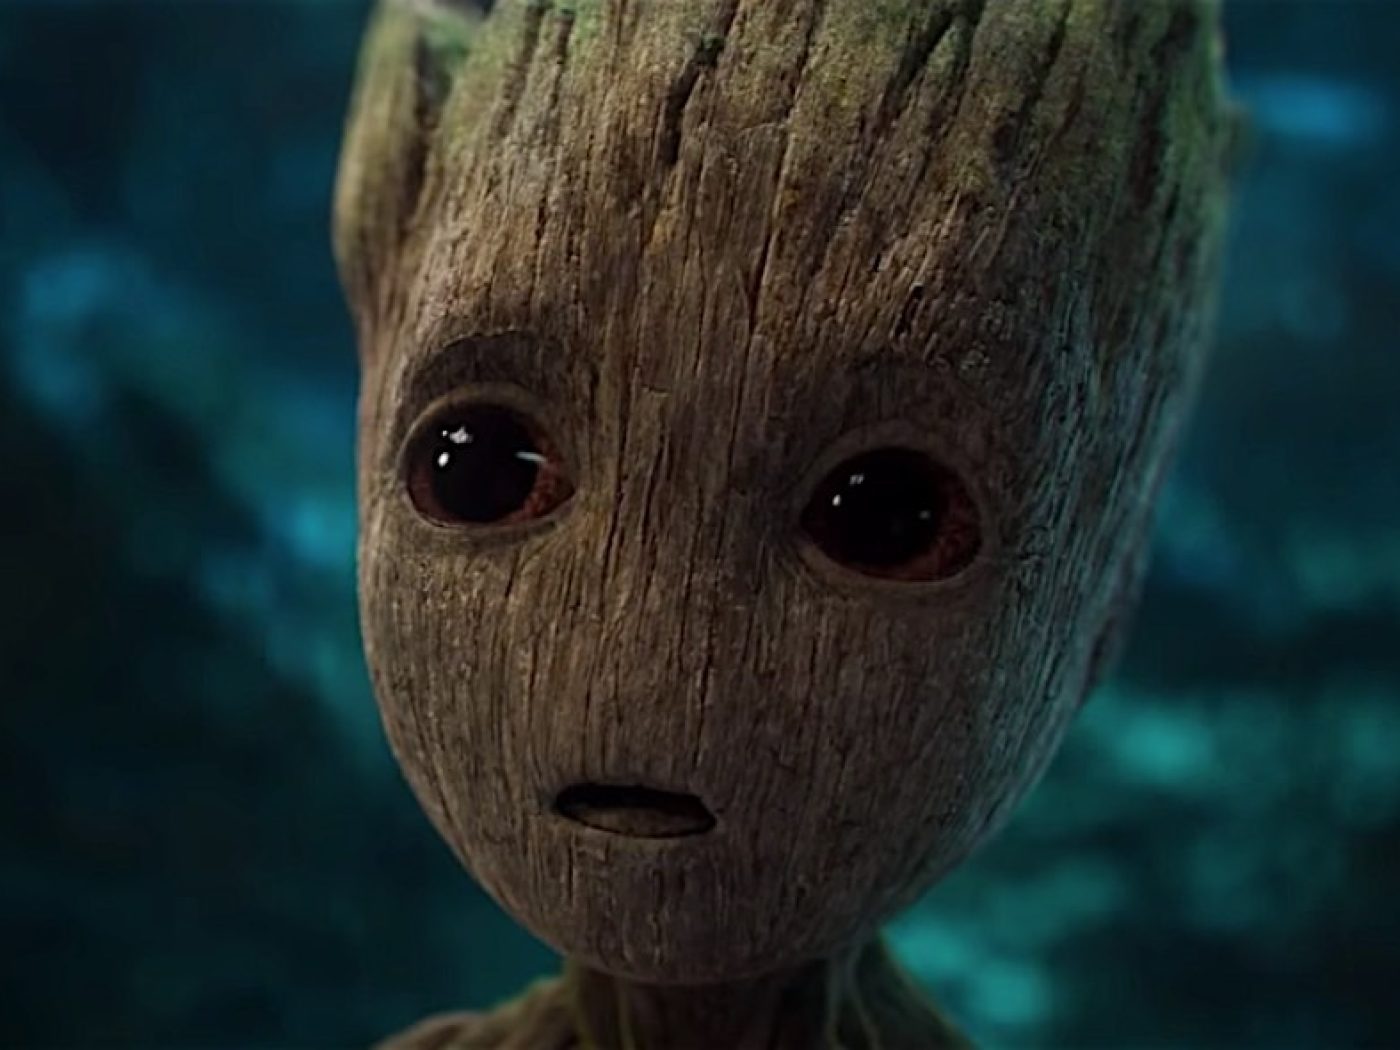 5 Interesting Stories In The I Am Groot Series, What Are They?